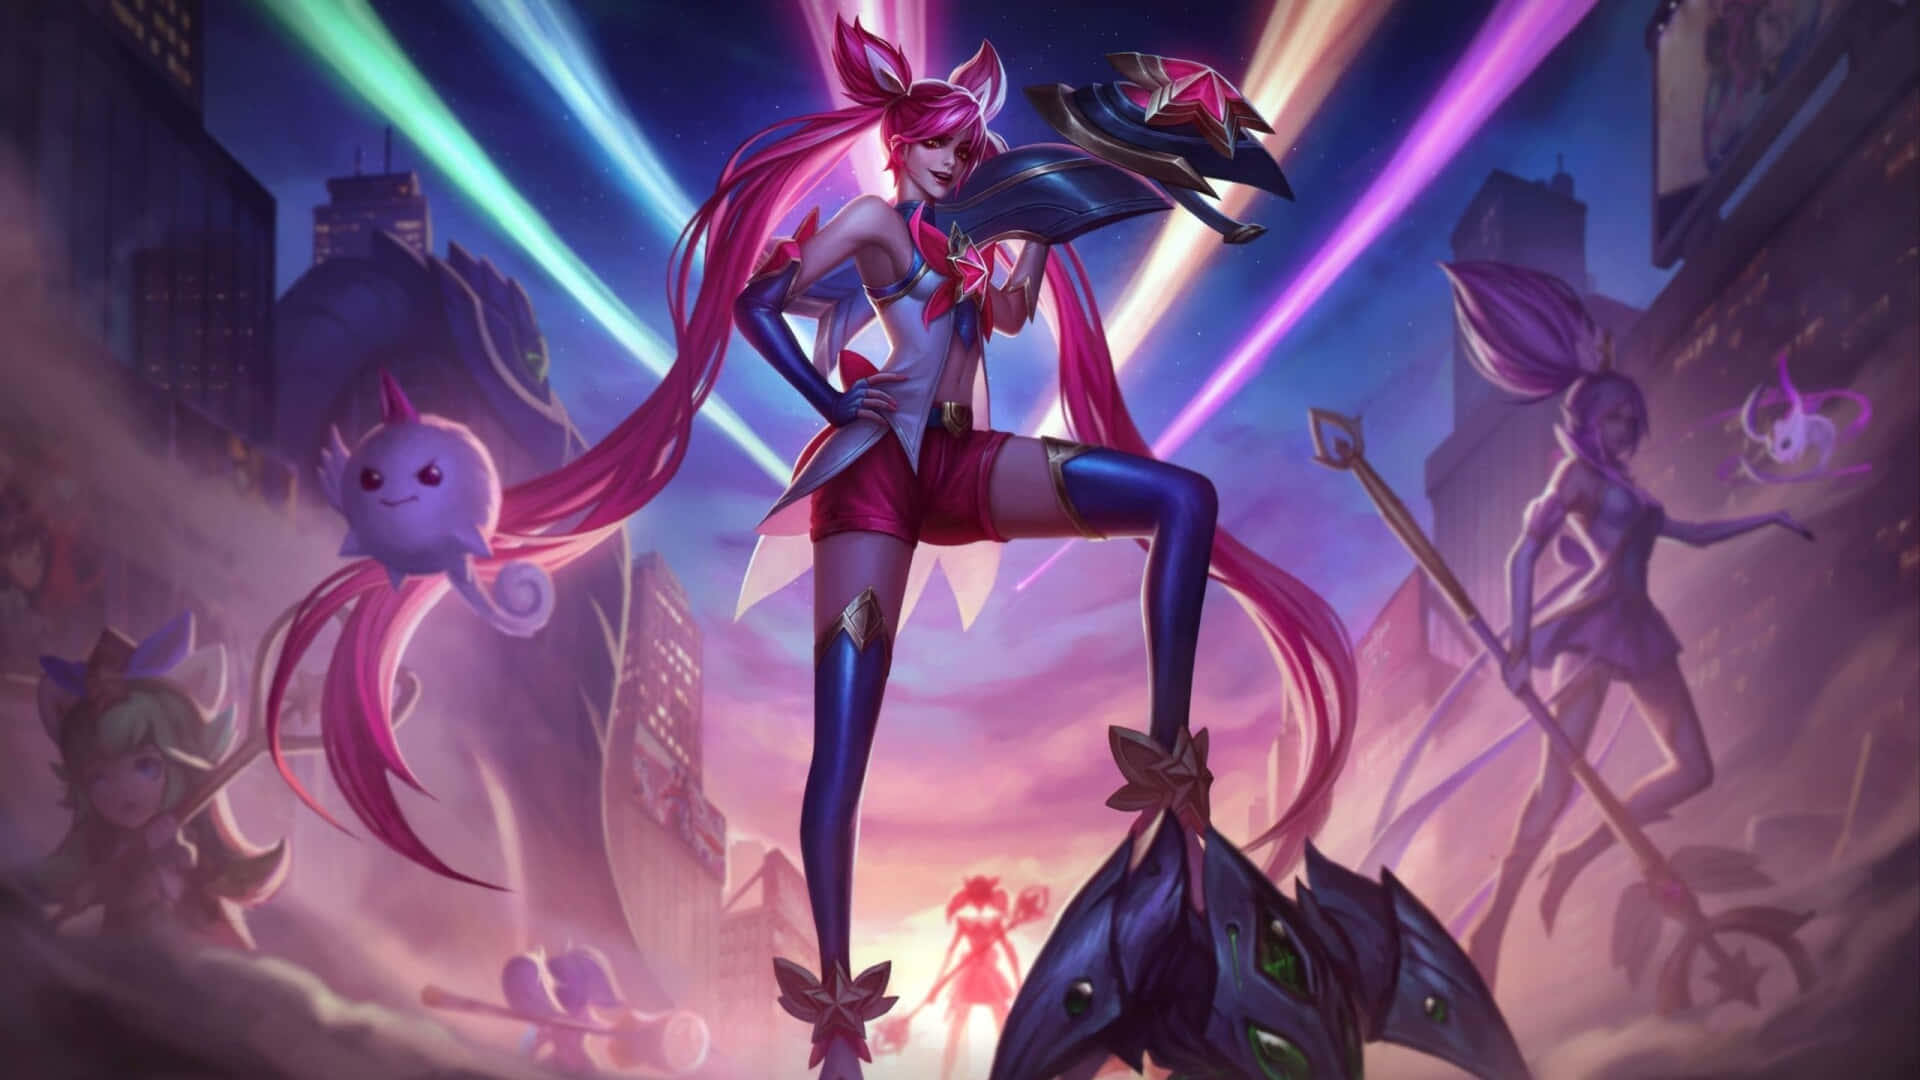 Jinx wielding her weapons in a dynamic pose on a stylized battle background.